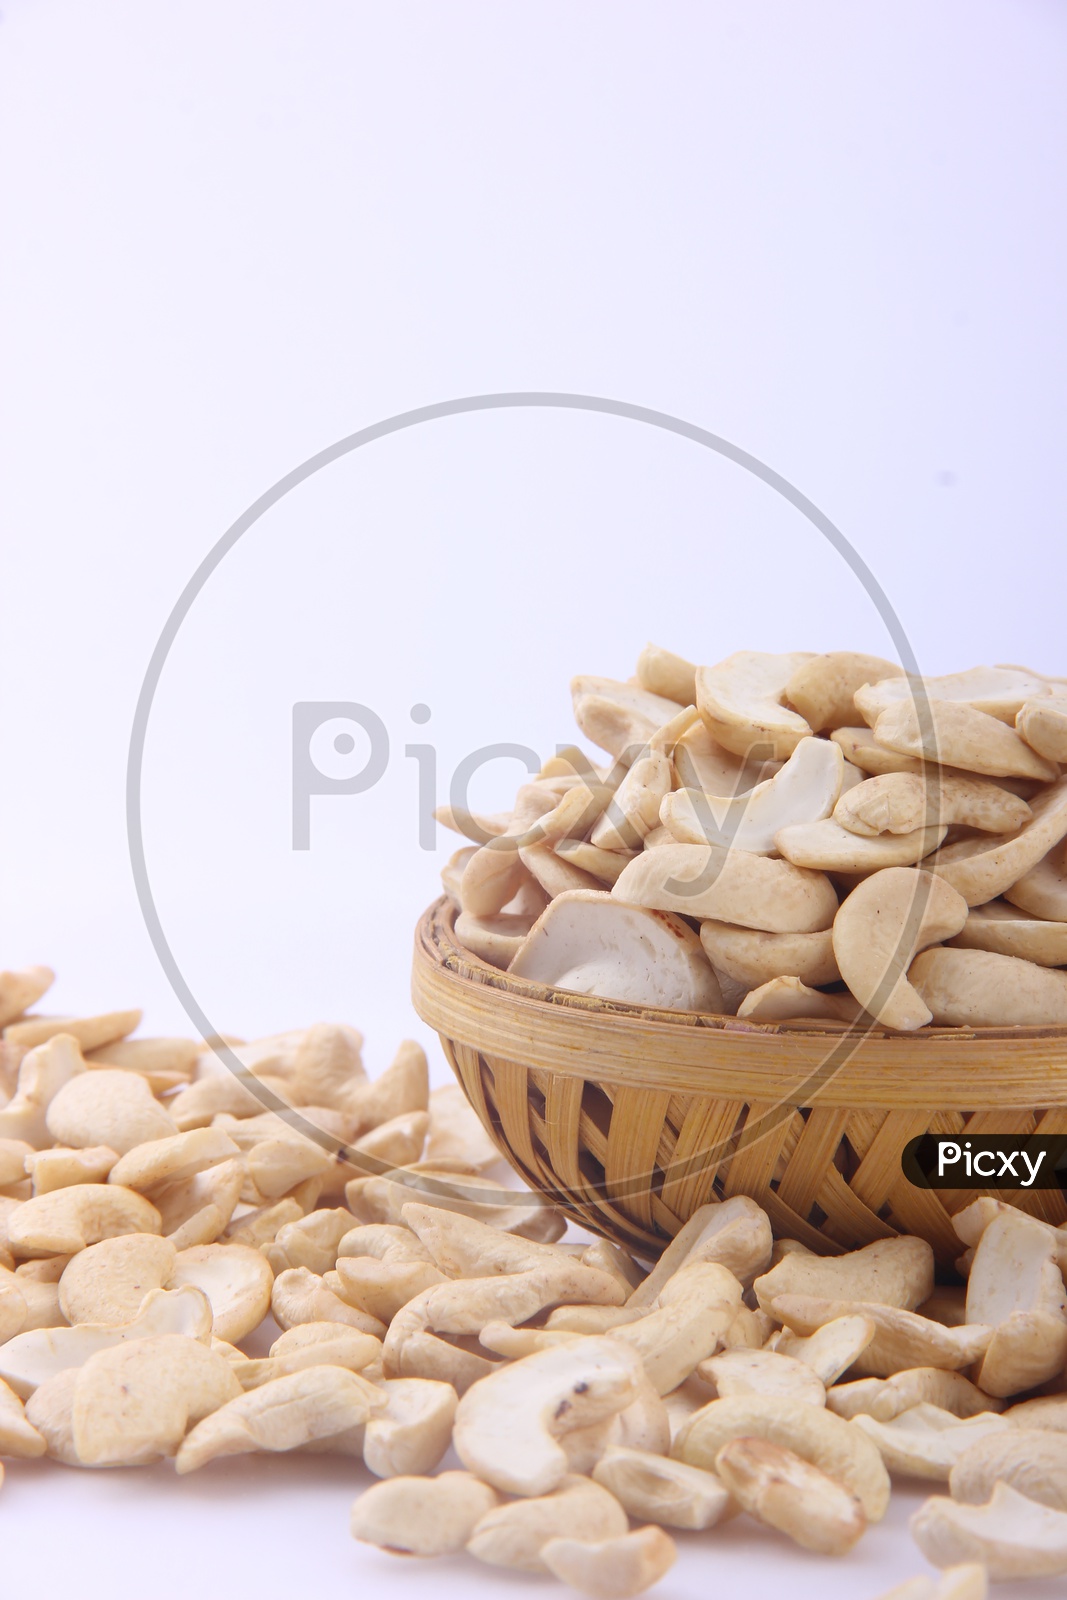 Bowl of Cashews / Cashews  in a Bowl isolated on a White Background